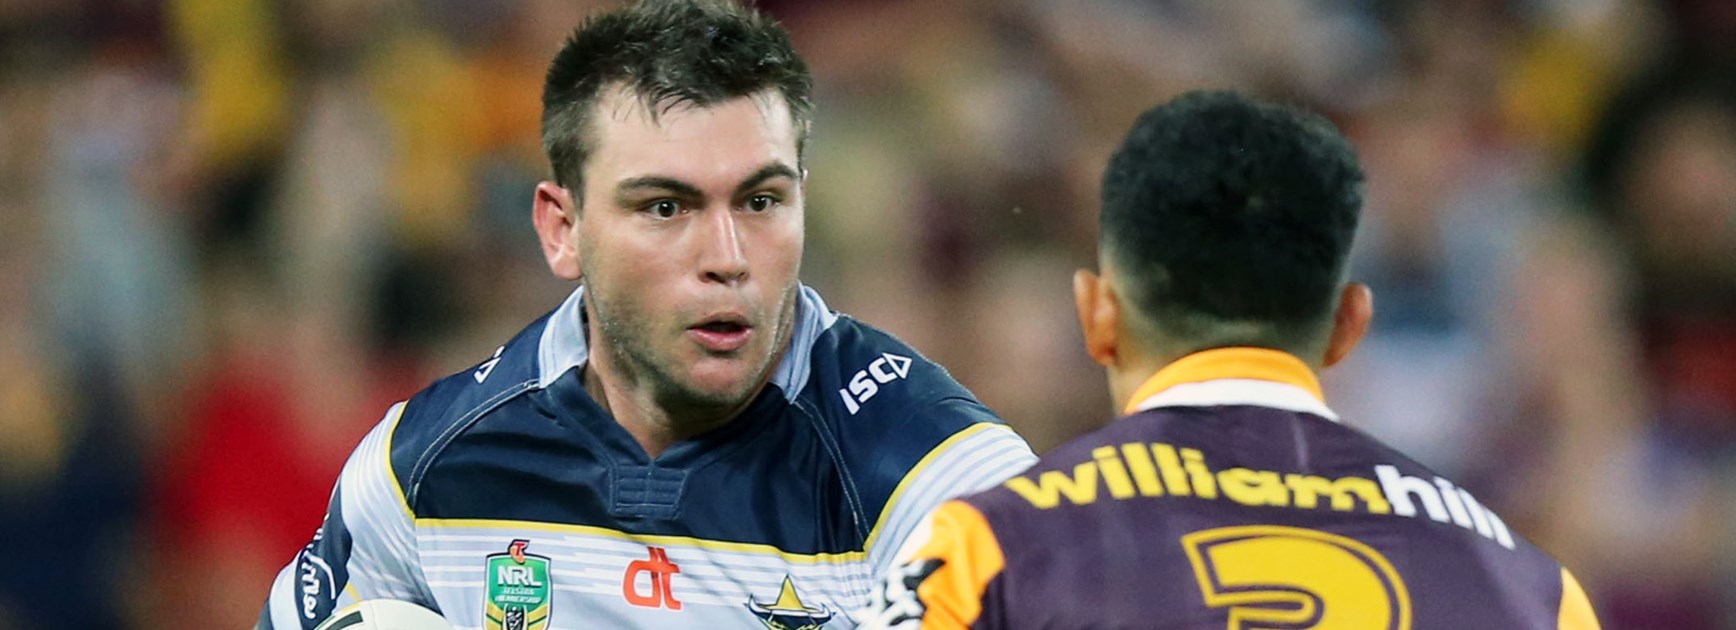 Cowboys winger Kyle Feldt is in line for a call up to the Queensland side in 2016.